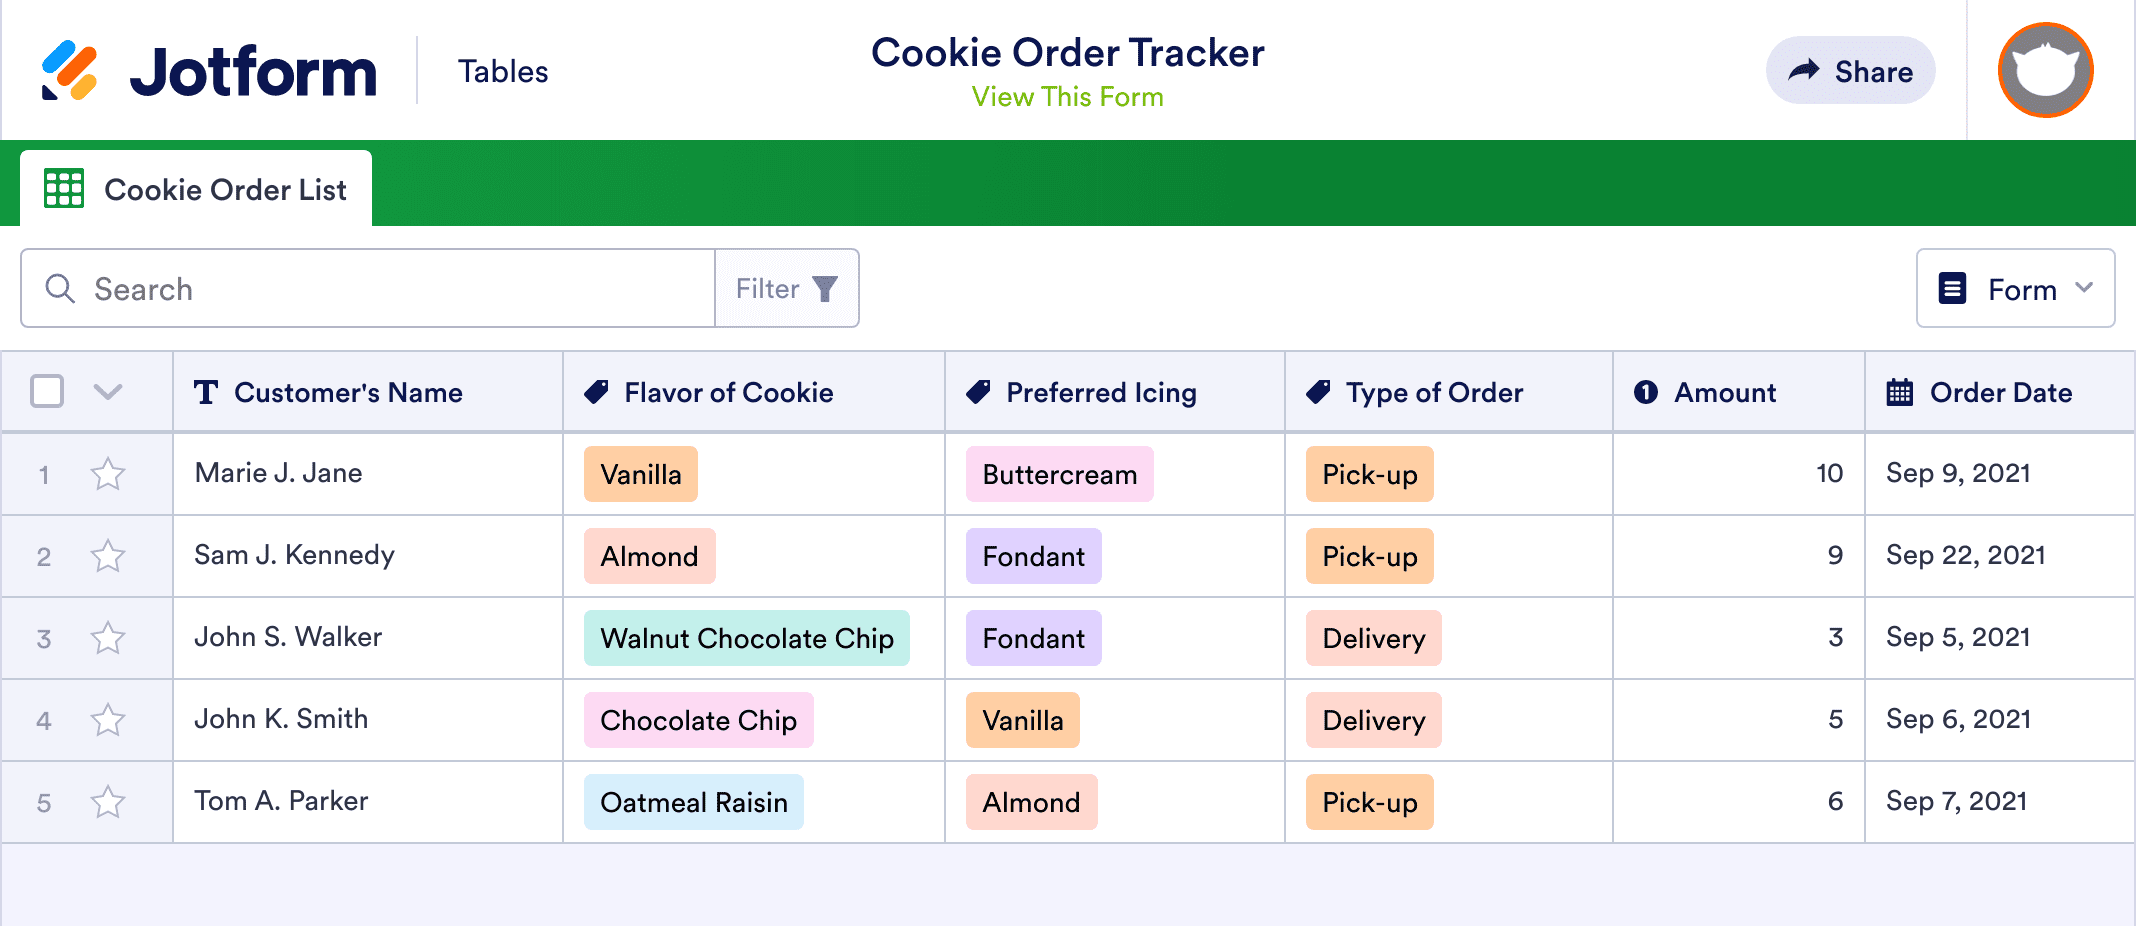 Cookie Order Tracker Template | Jotform Tables